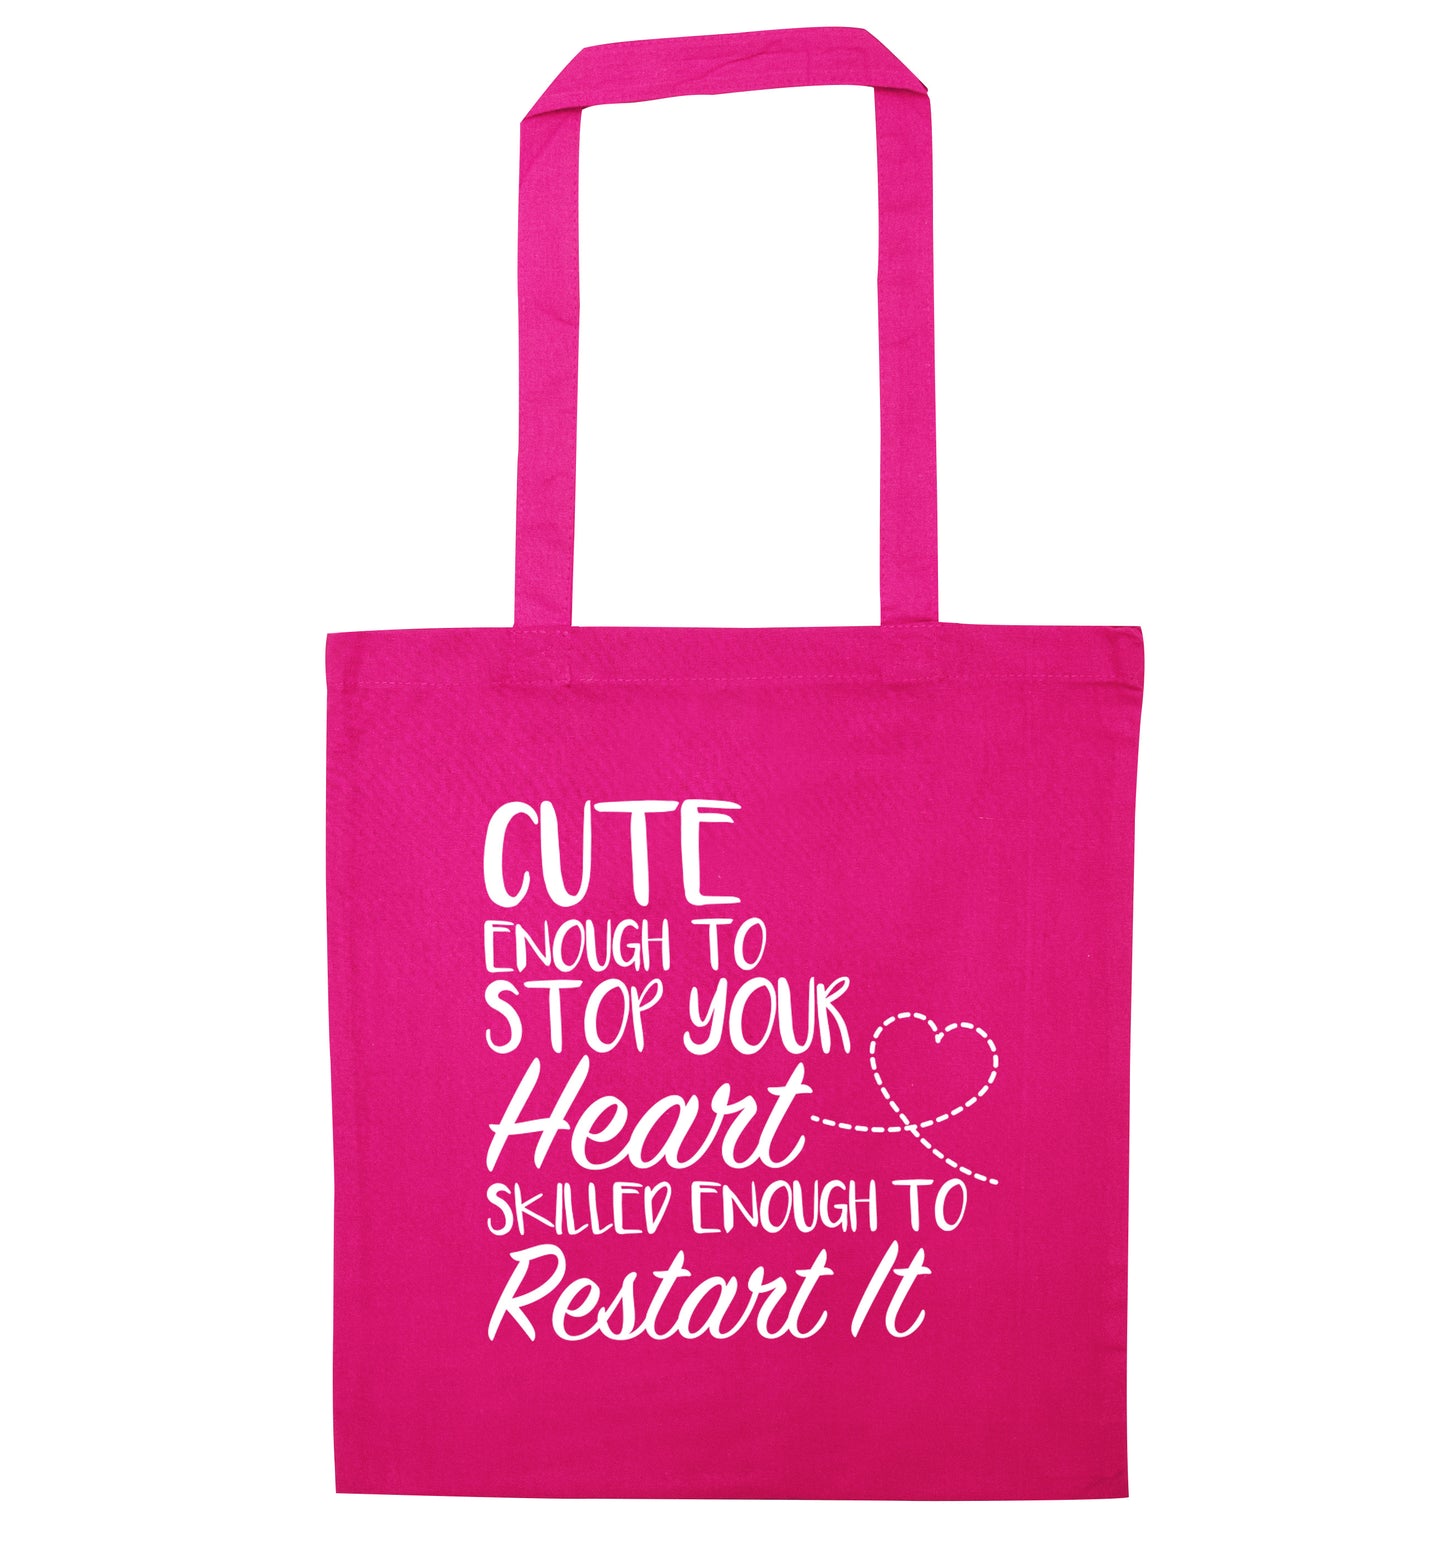 Cute enough to stop your heart skilled enough to restart it pink tote bag